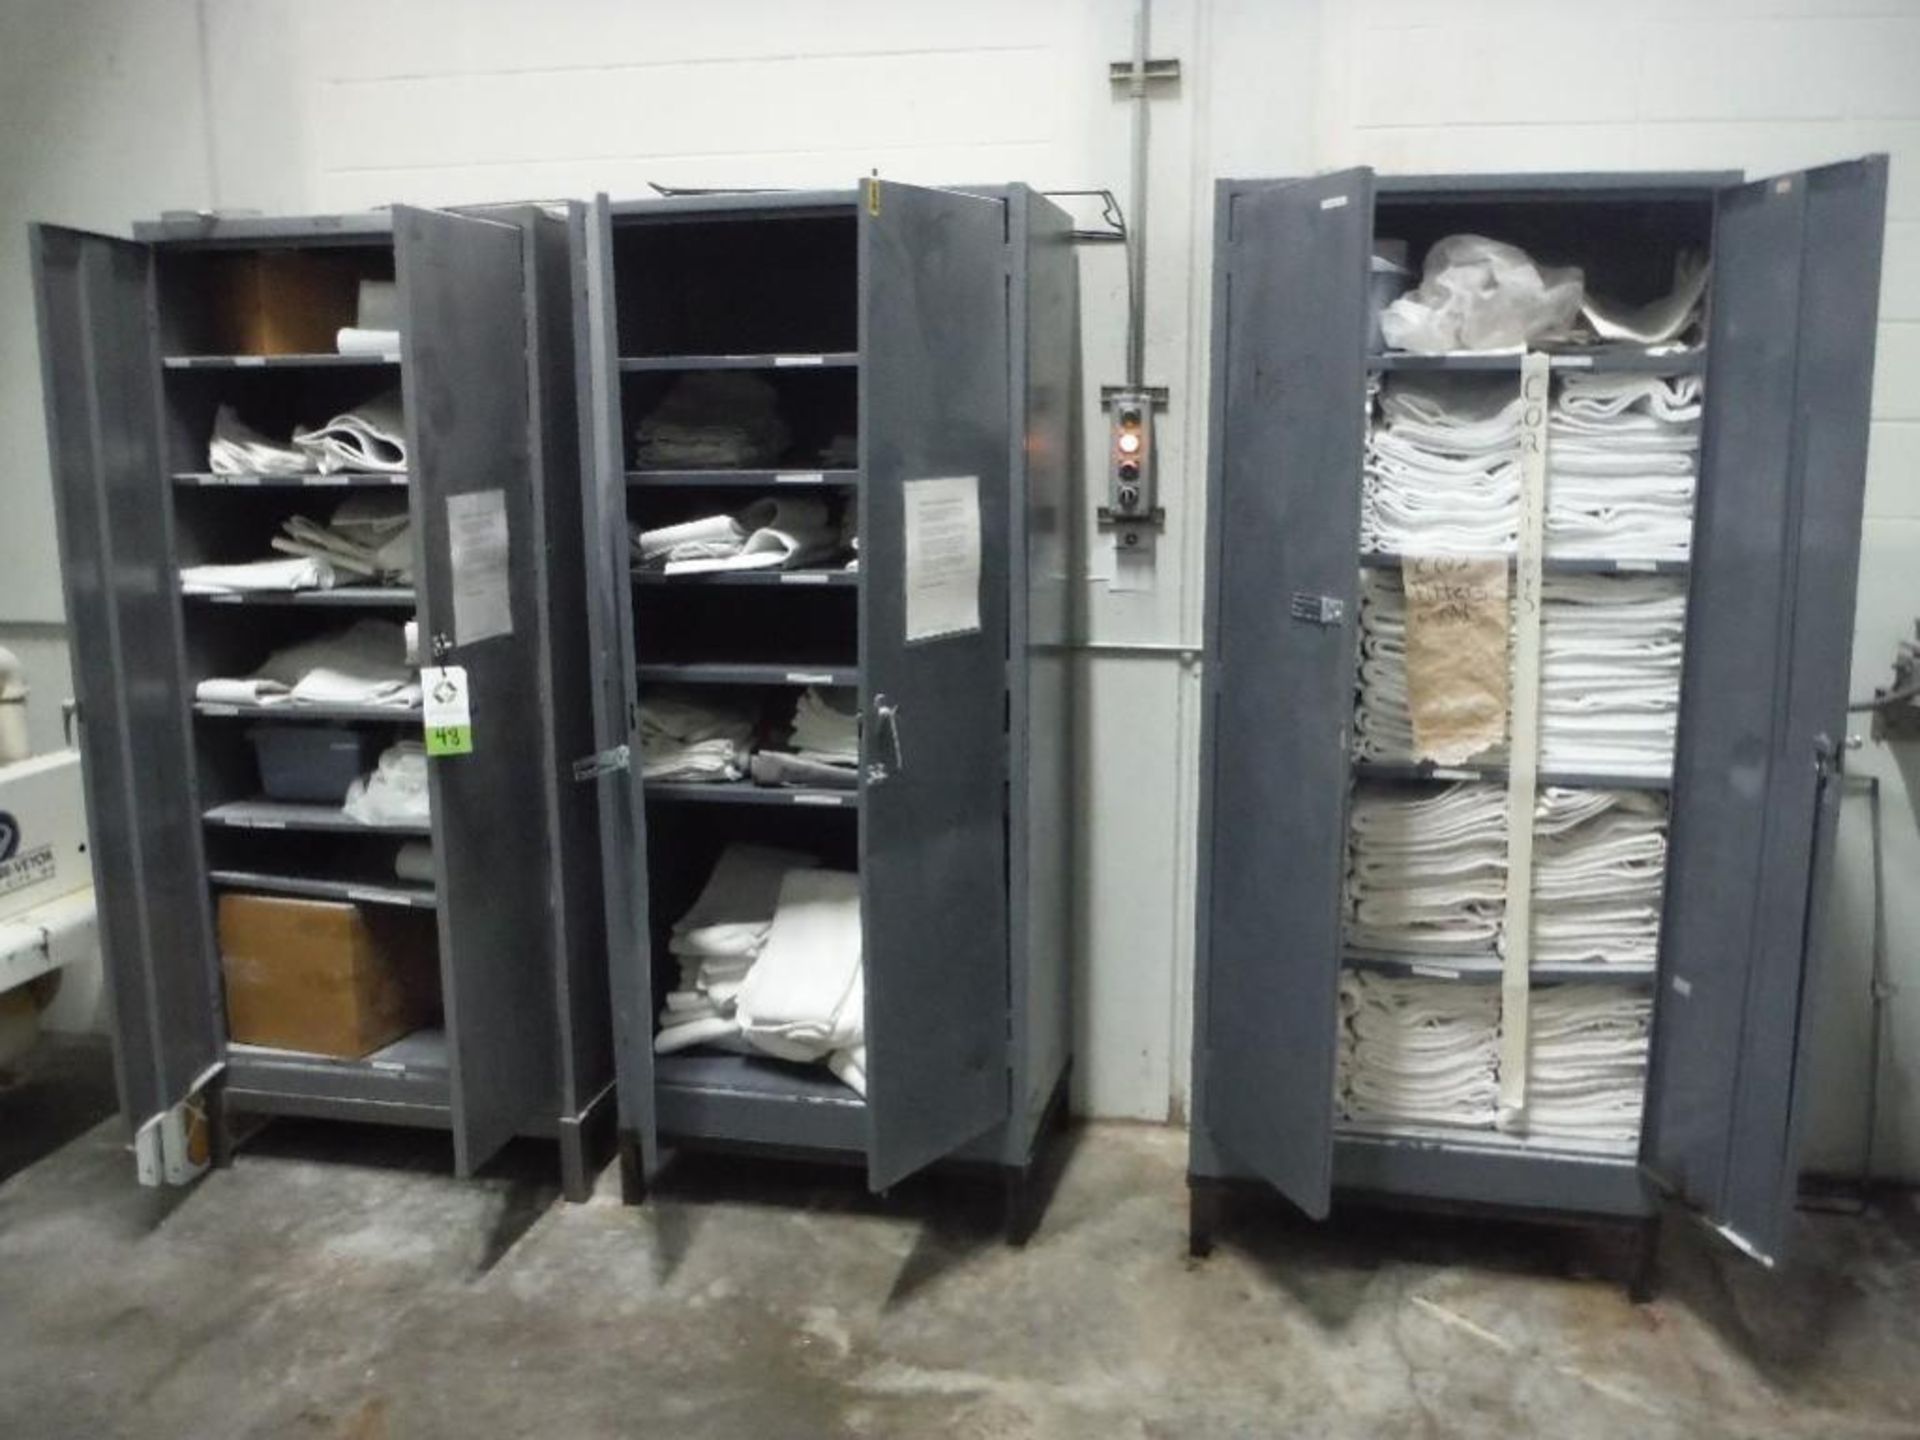 (3) cabinets and filter socks, and 2 carts of sock plates (LOT) - Rigging Fee: $150